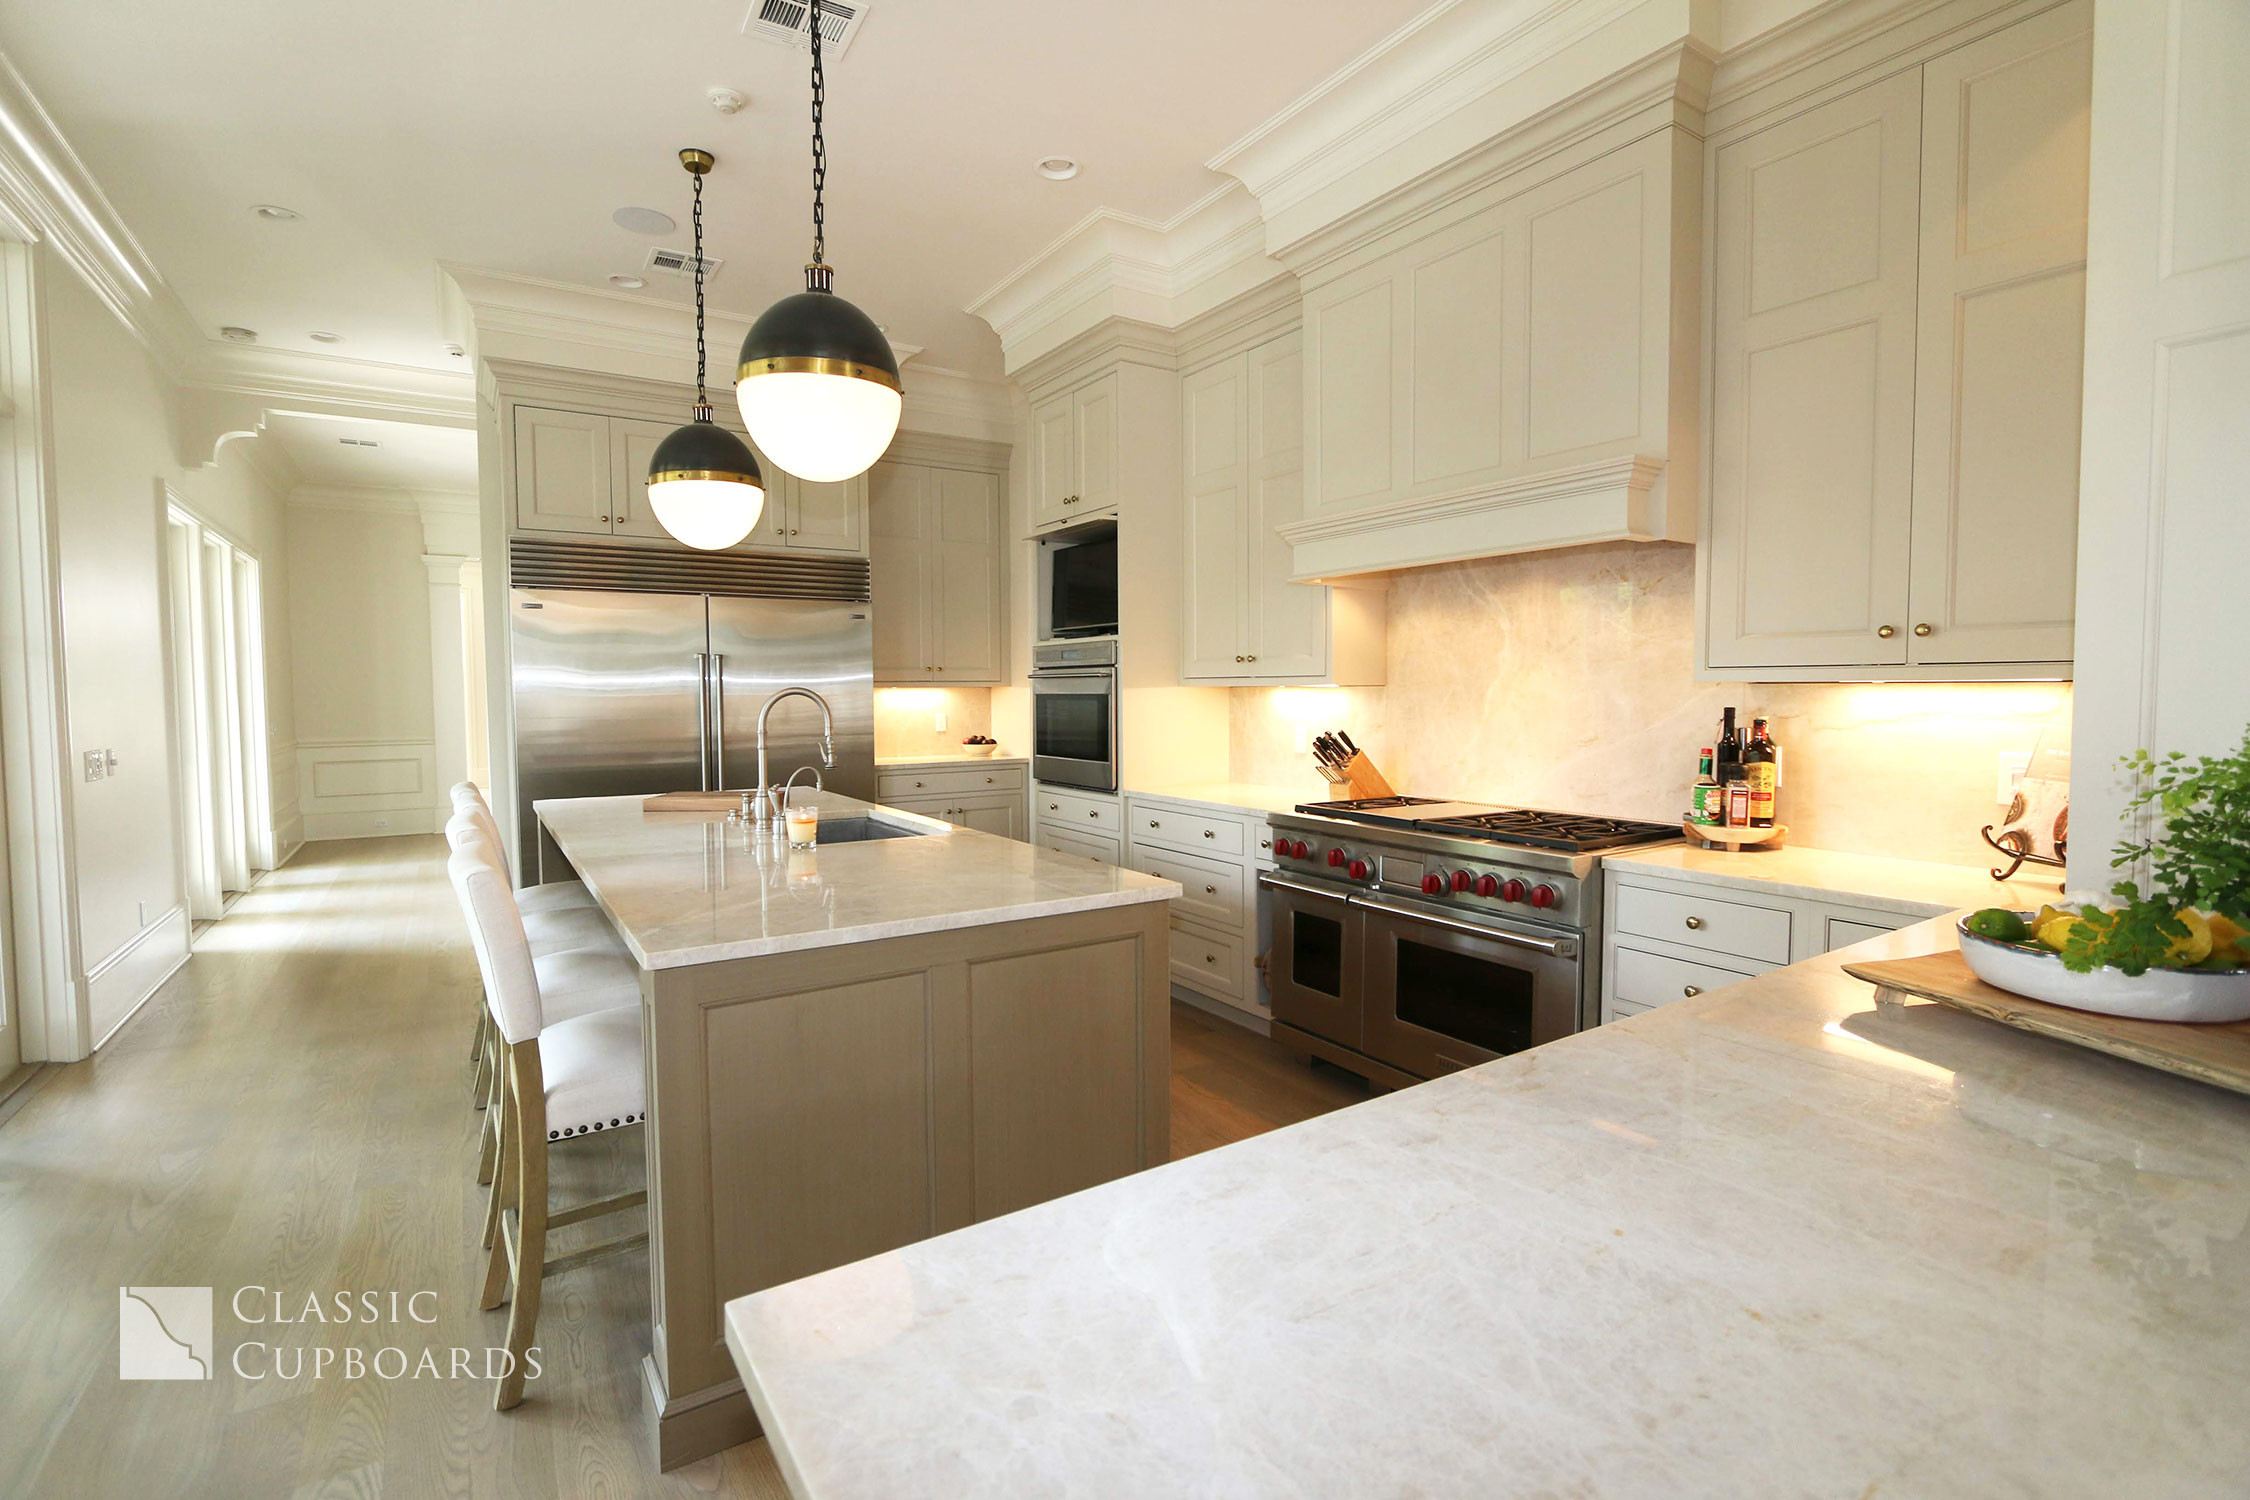 Traditional Kitchen design with custom cabinets